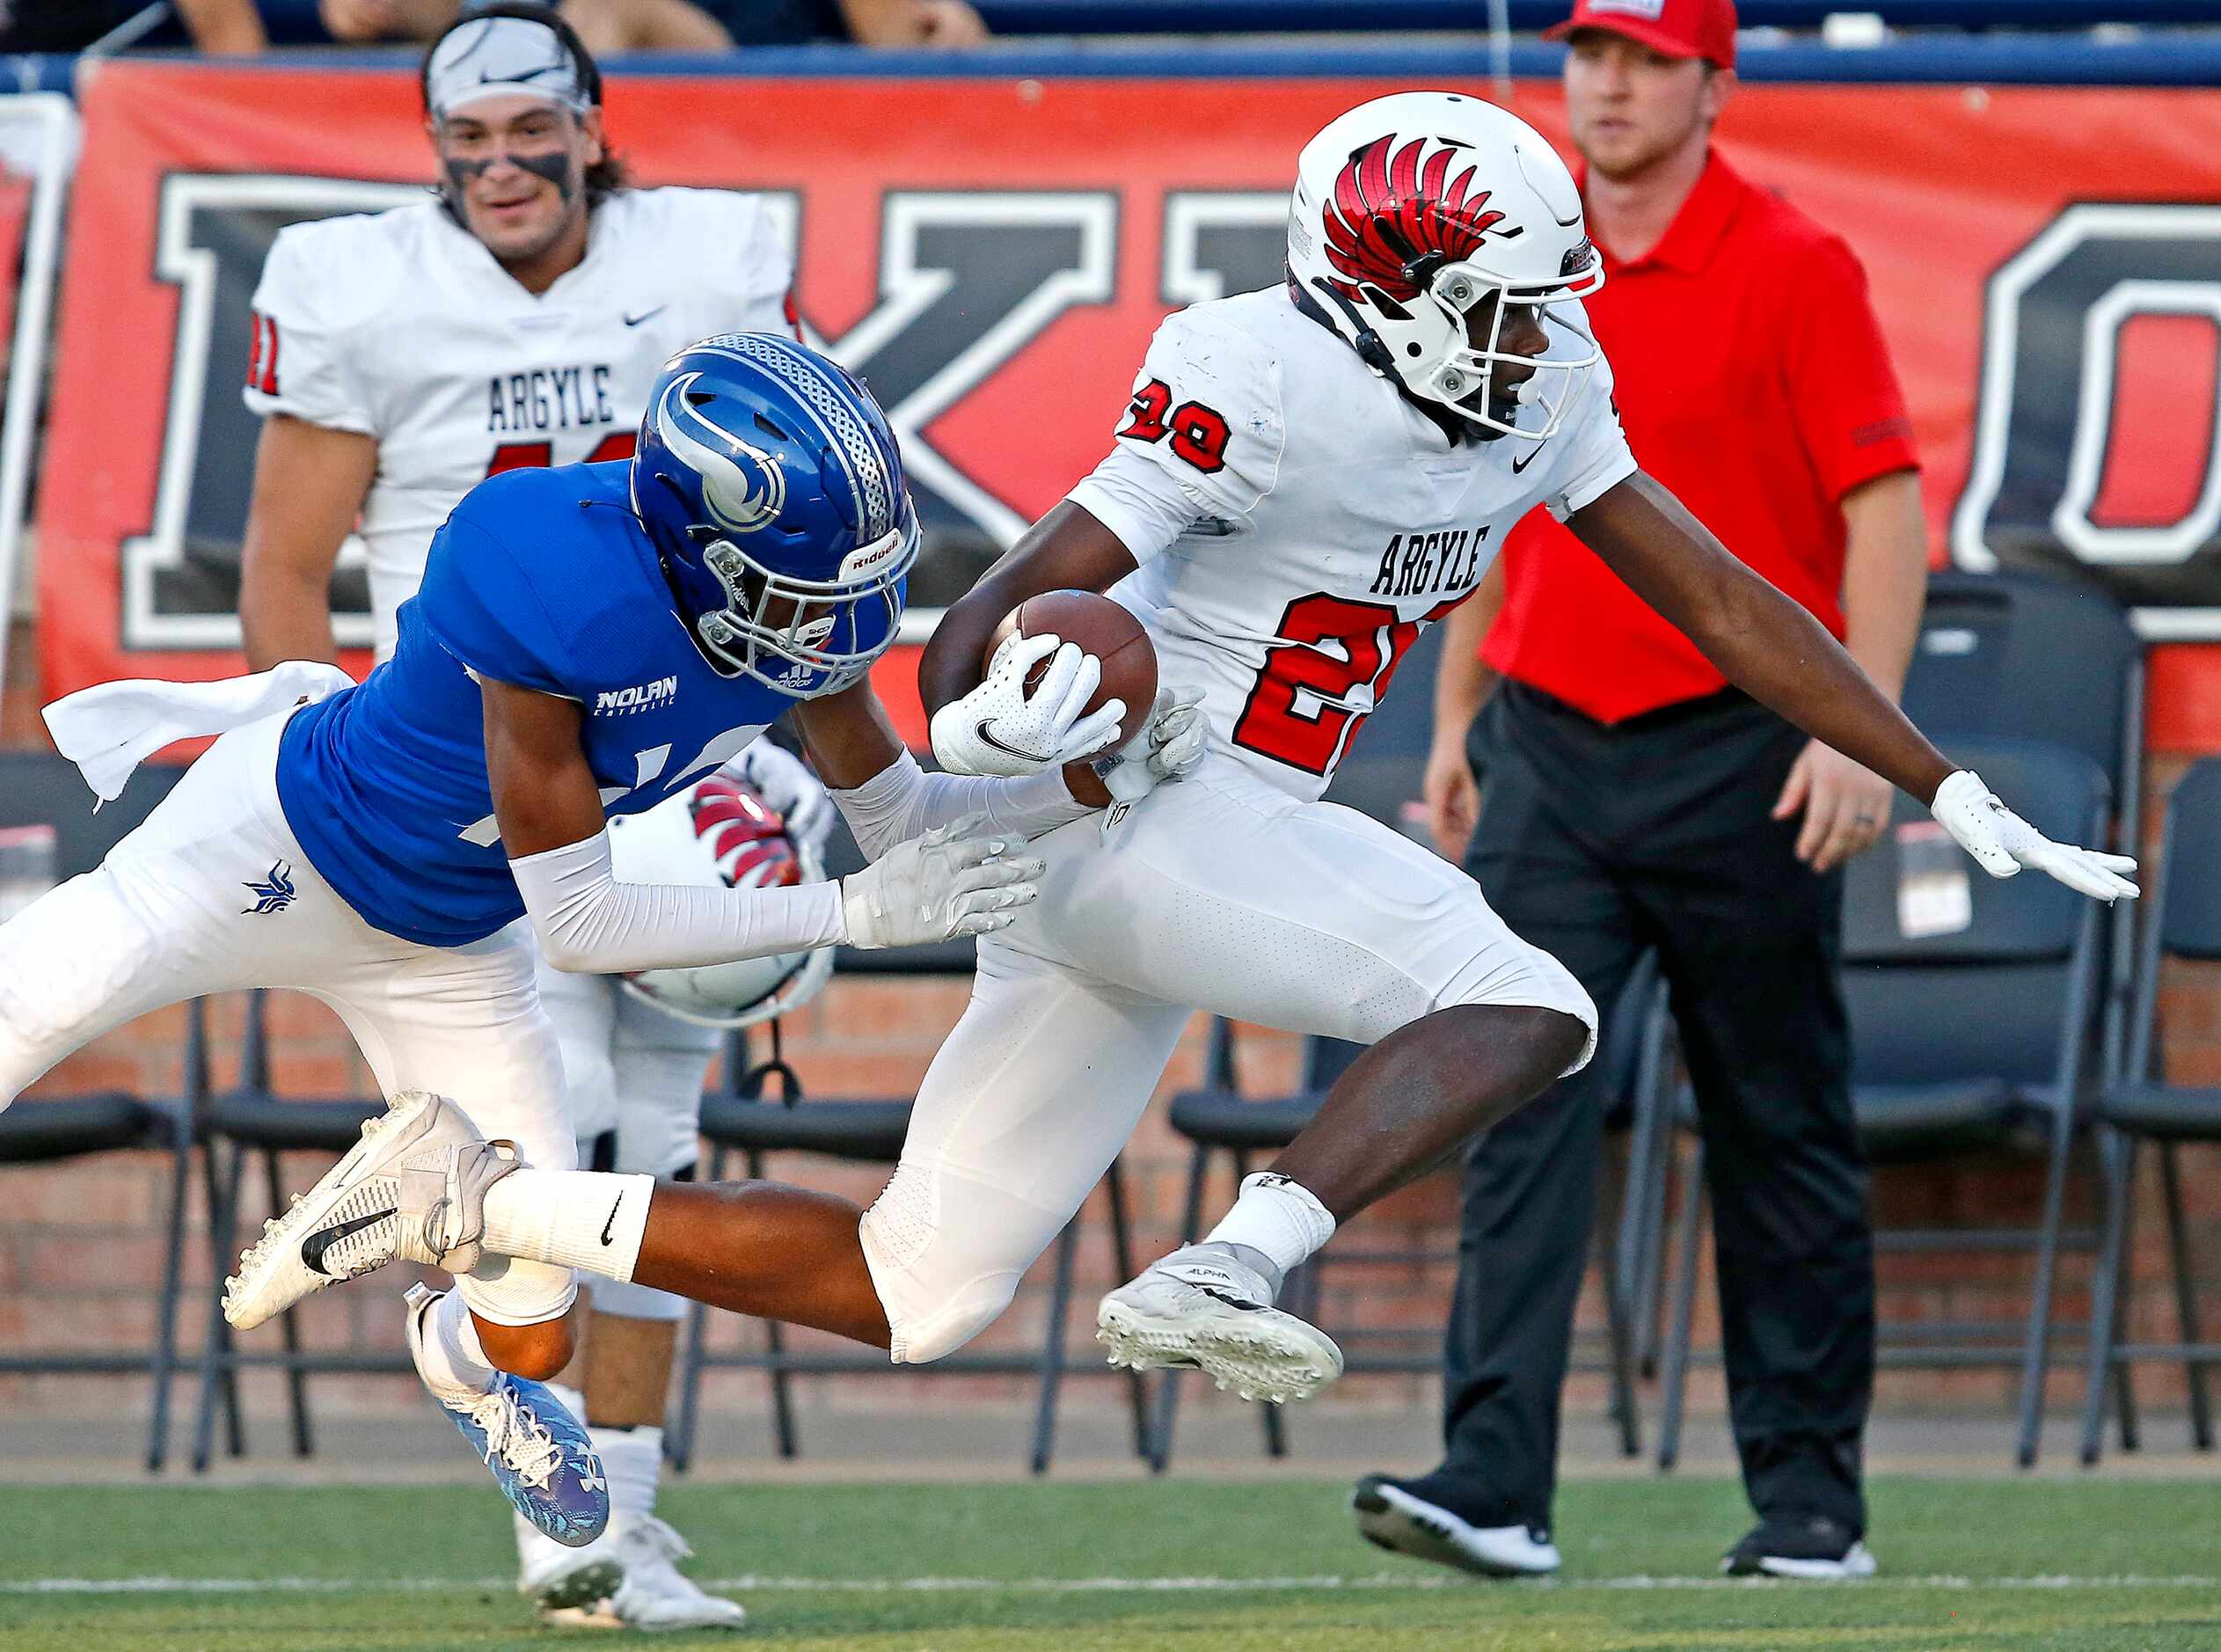 Argyle High School wide receiver Jaamael Felton (29) is shoved out of bound by Nolan...